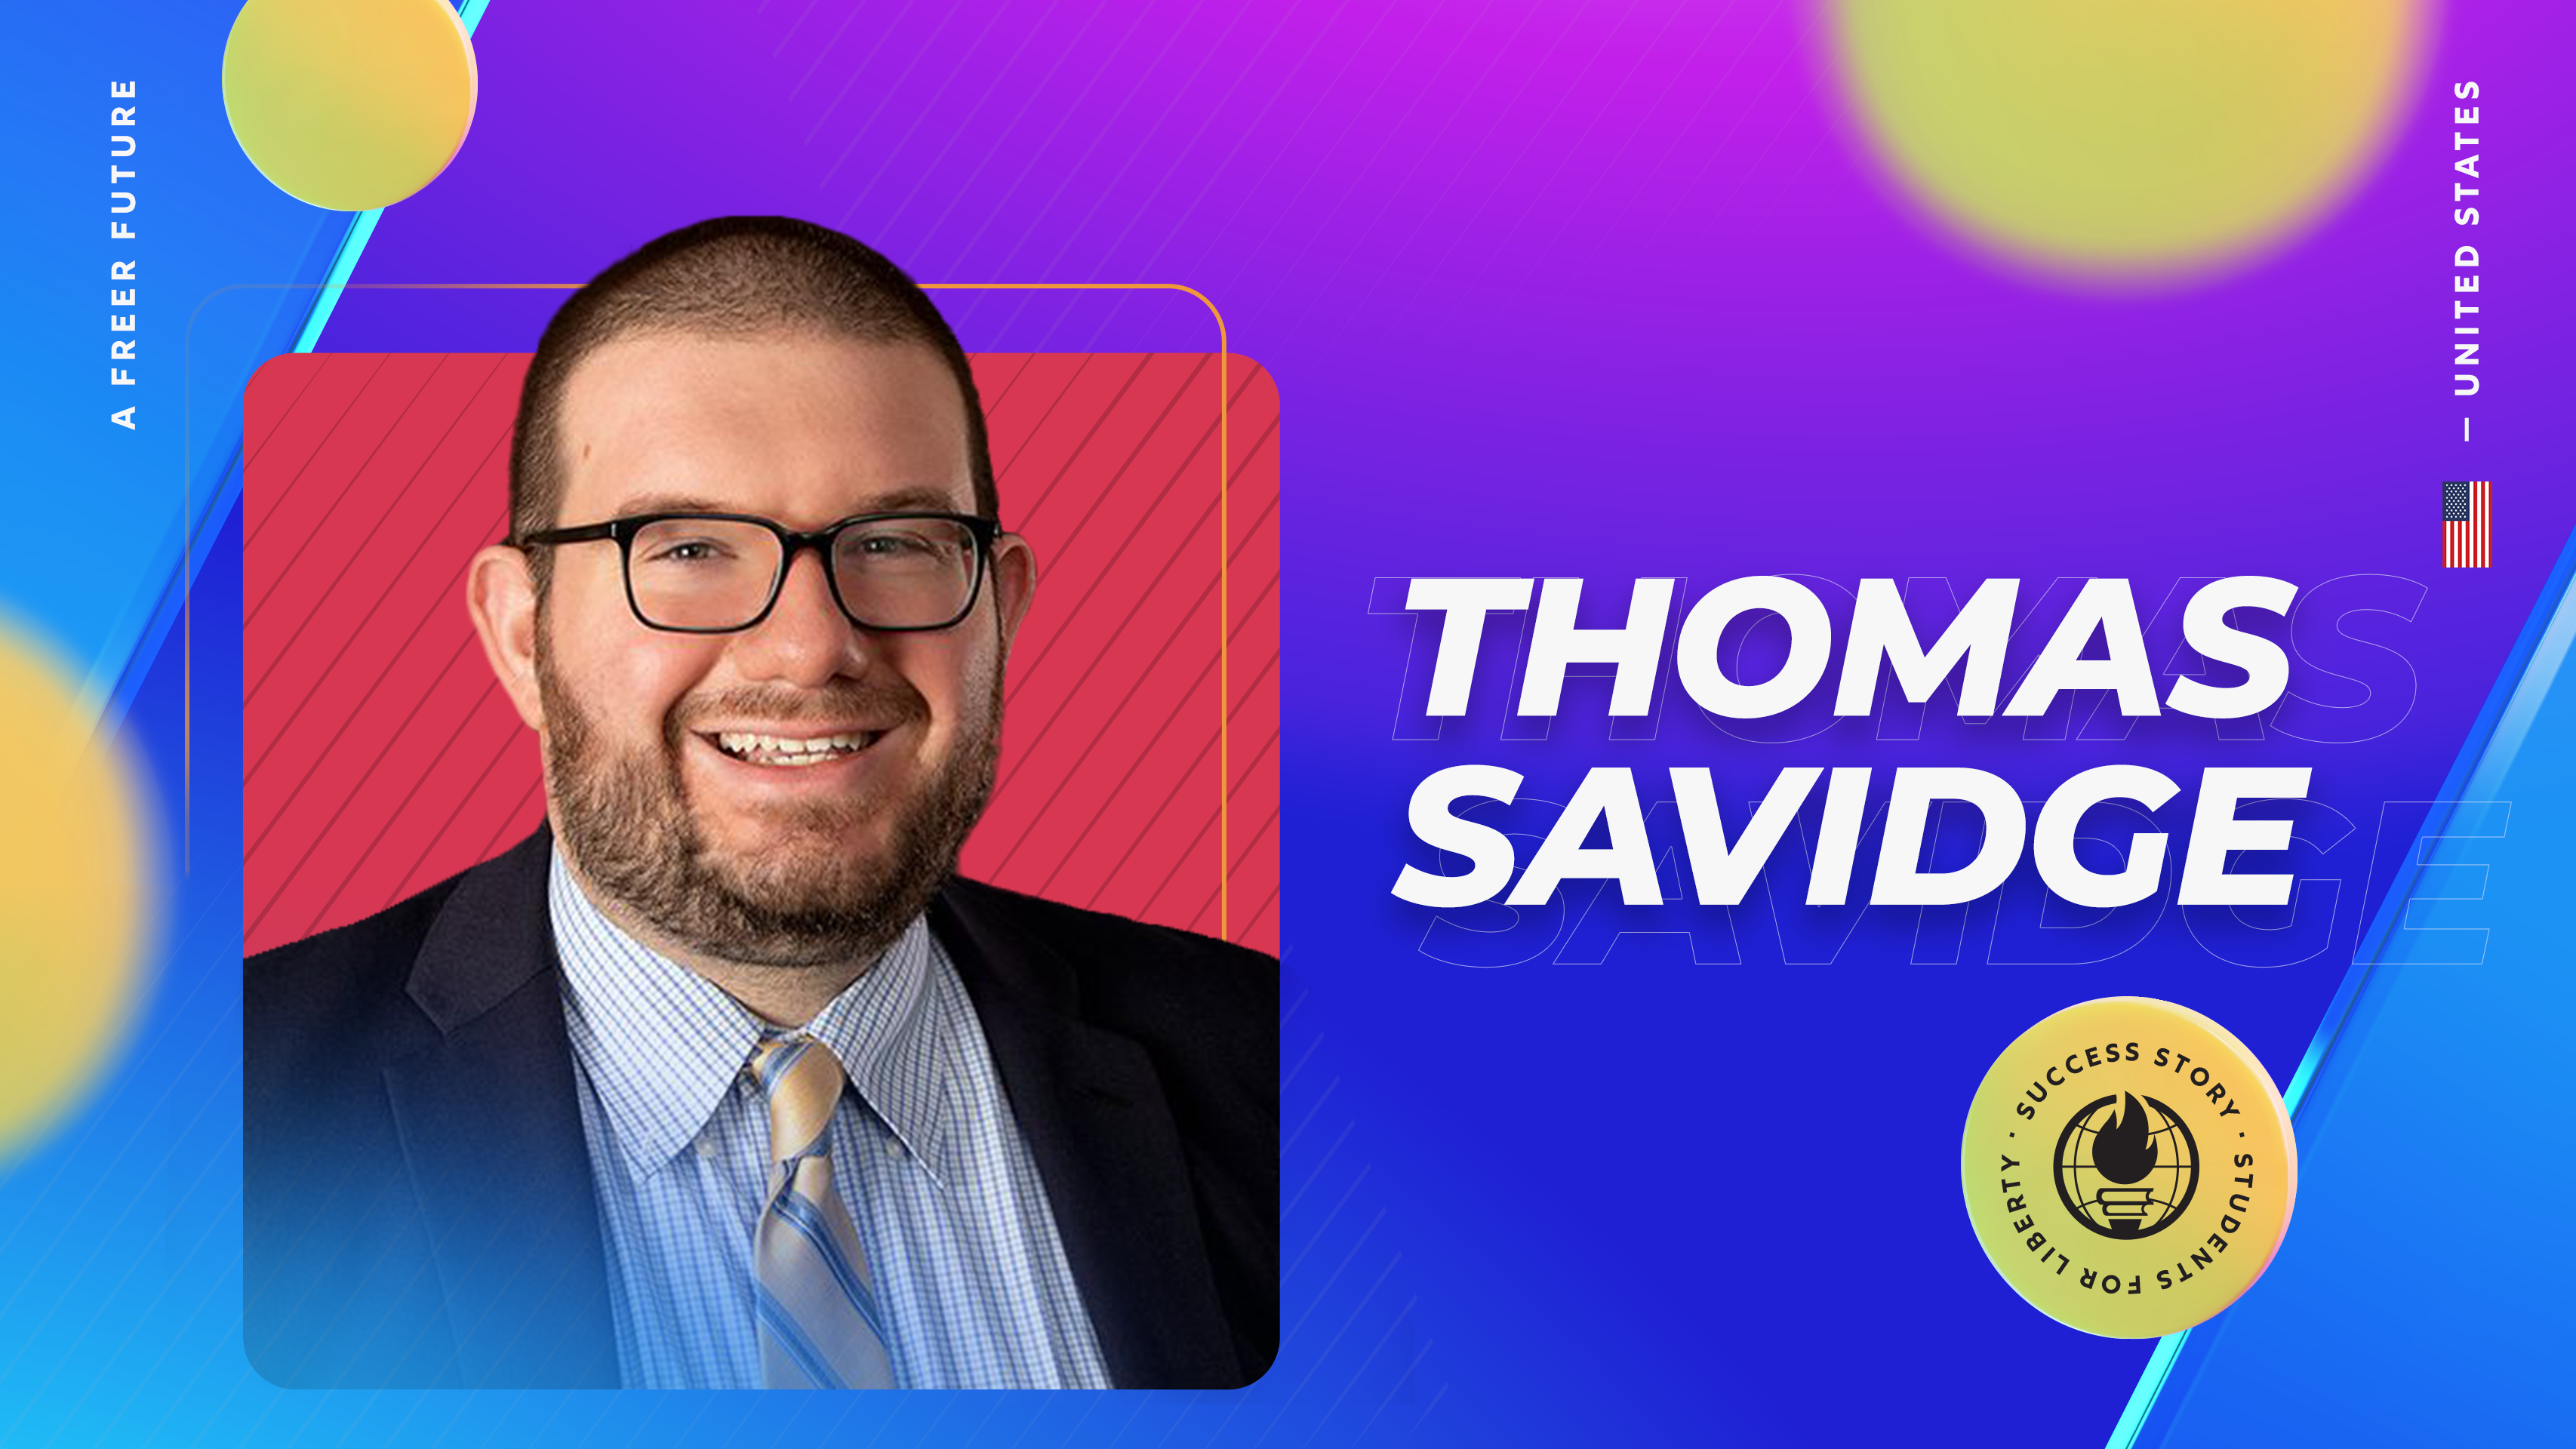 Thomas Savidge strives to promote tax and fiscal policies that enable us to save money while holding the government accountable